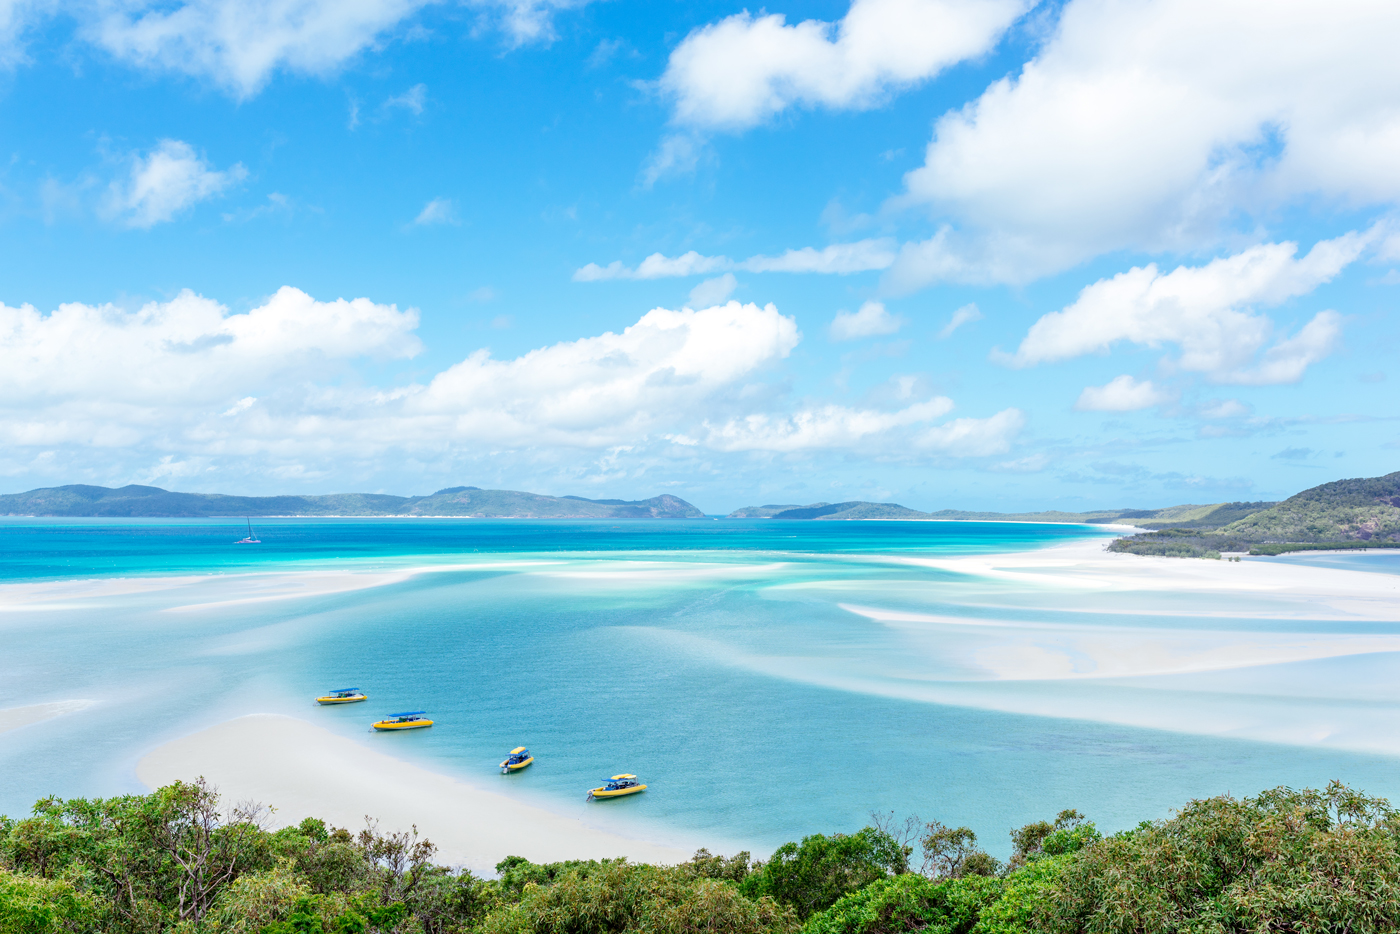 Welcome to Winter in the Whitsundays